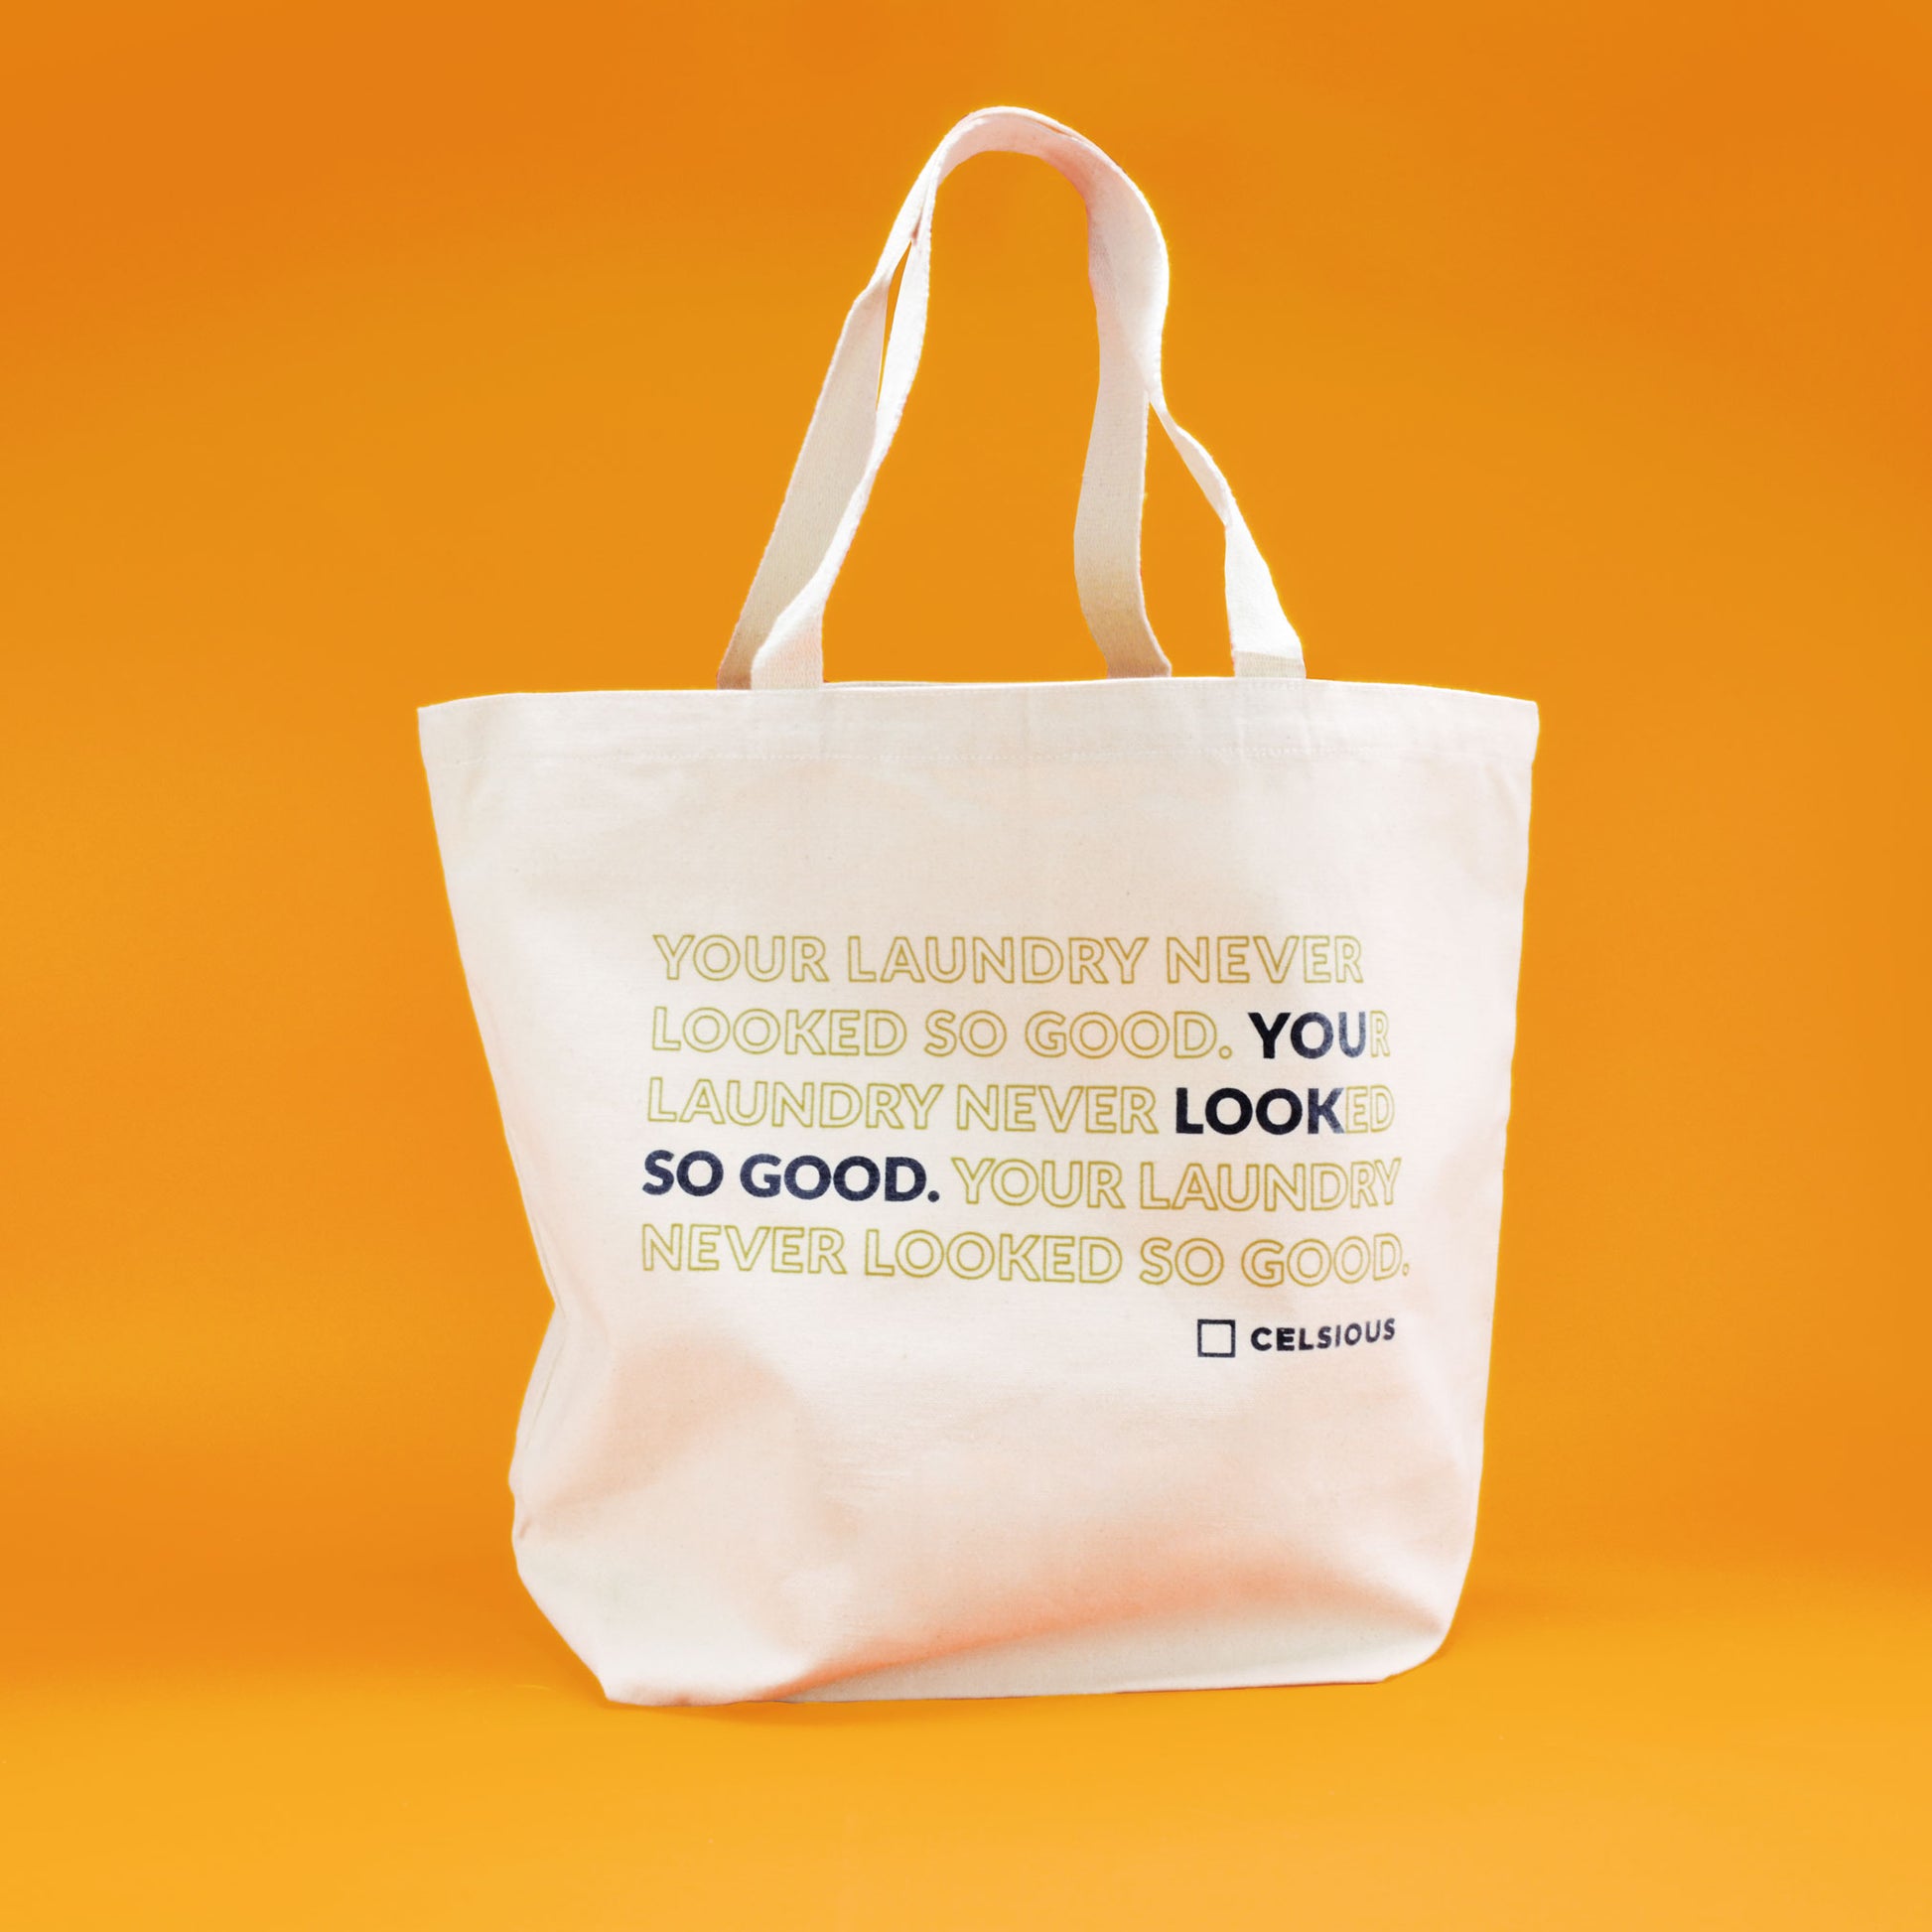 A beige Celsious tote bag with the words "Your laundry never looked so good" printed in navy and seaweed green, shot on an orange background